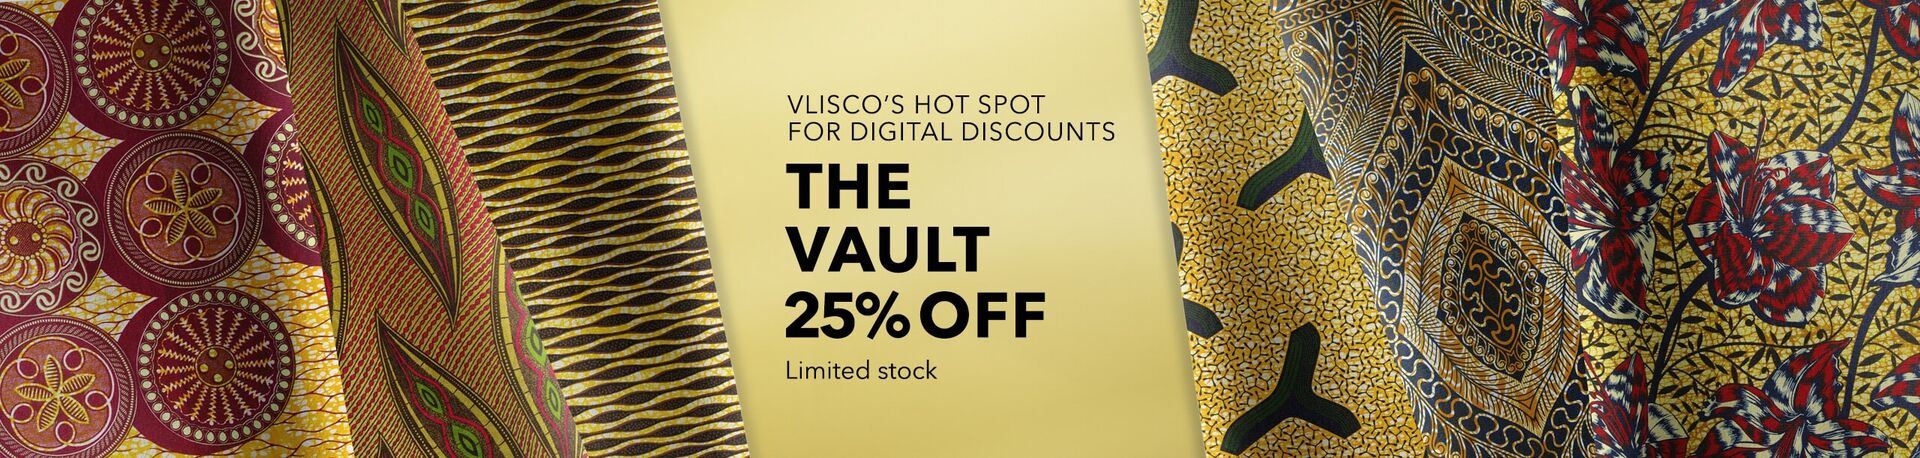 THE VAULT: Special offers